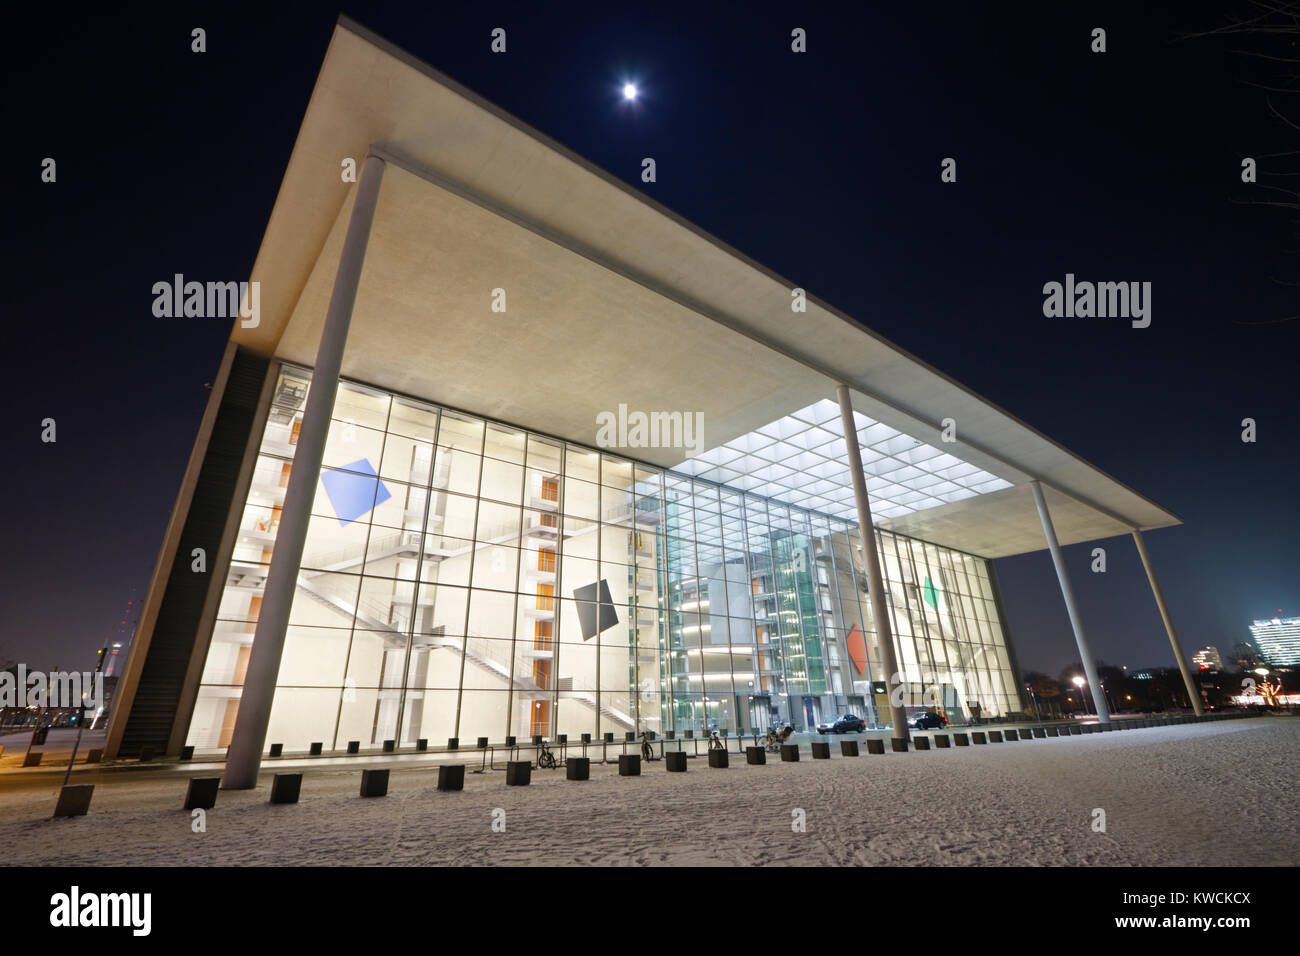 Night shot of a modern office building in the government district of Berlin, Germany. Stock Photo